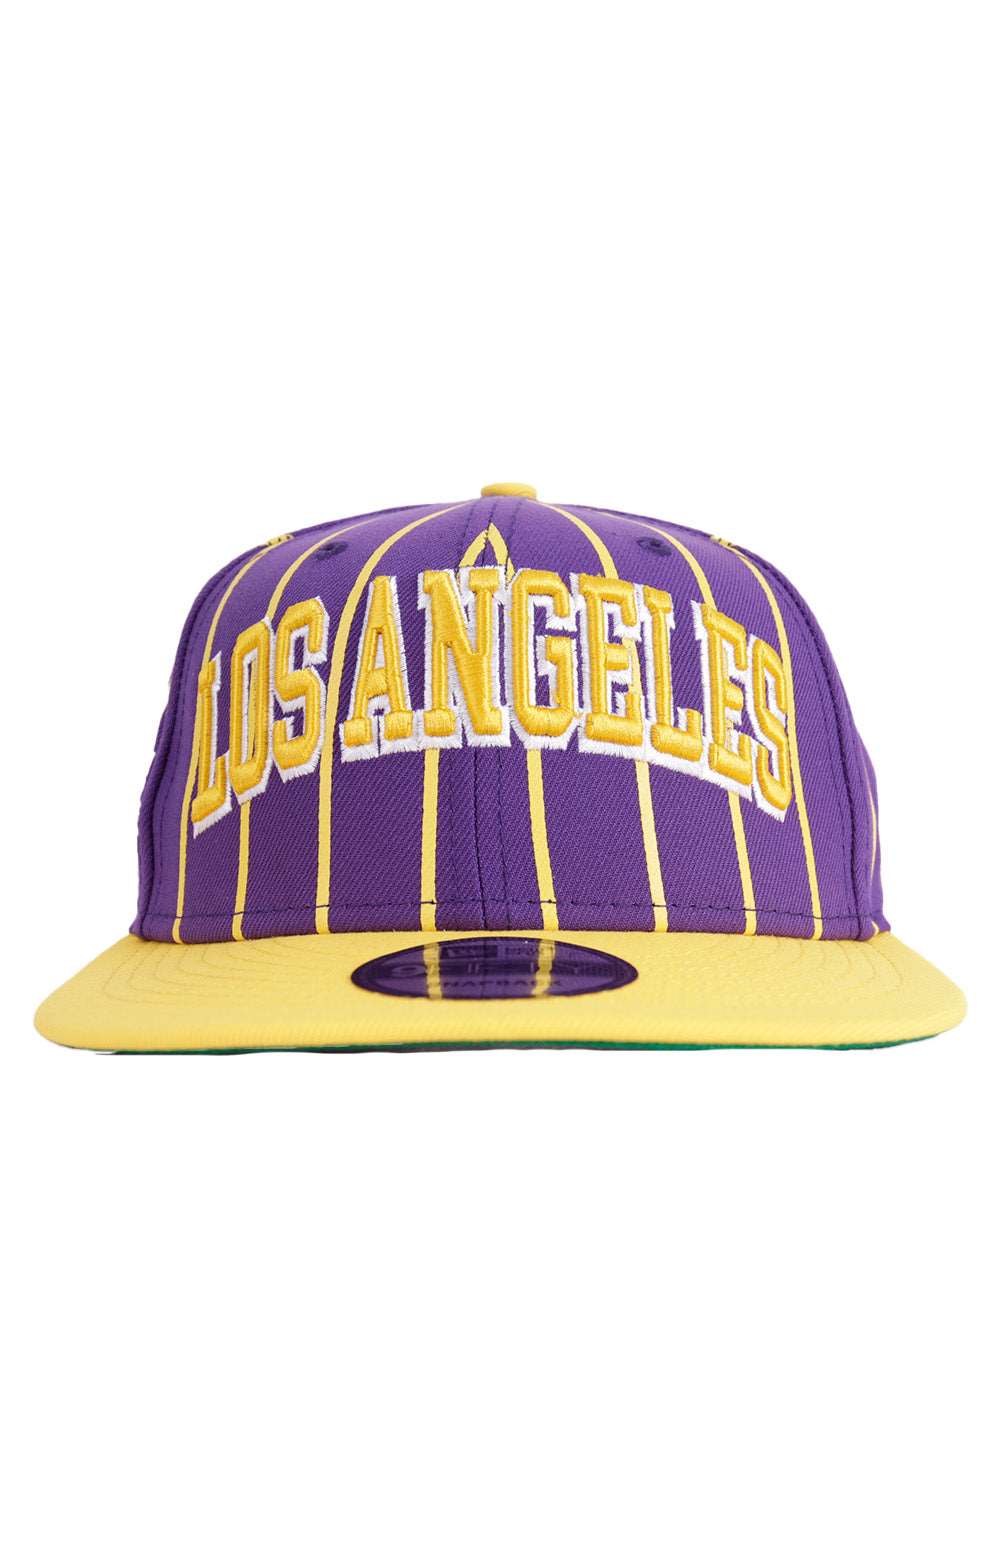 New Era Los Angeles Lakers City Arch 9FIFTY Snapback Hat